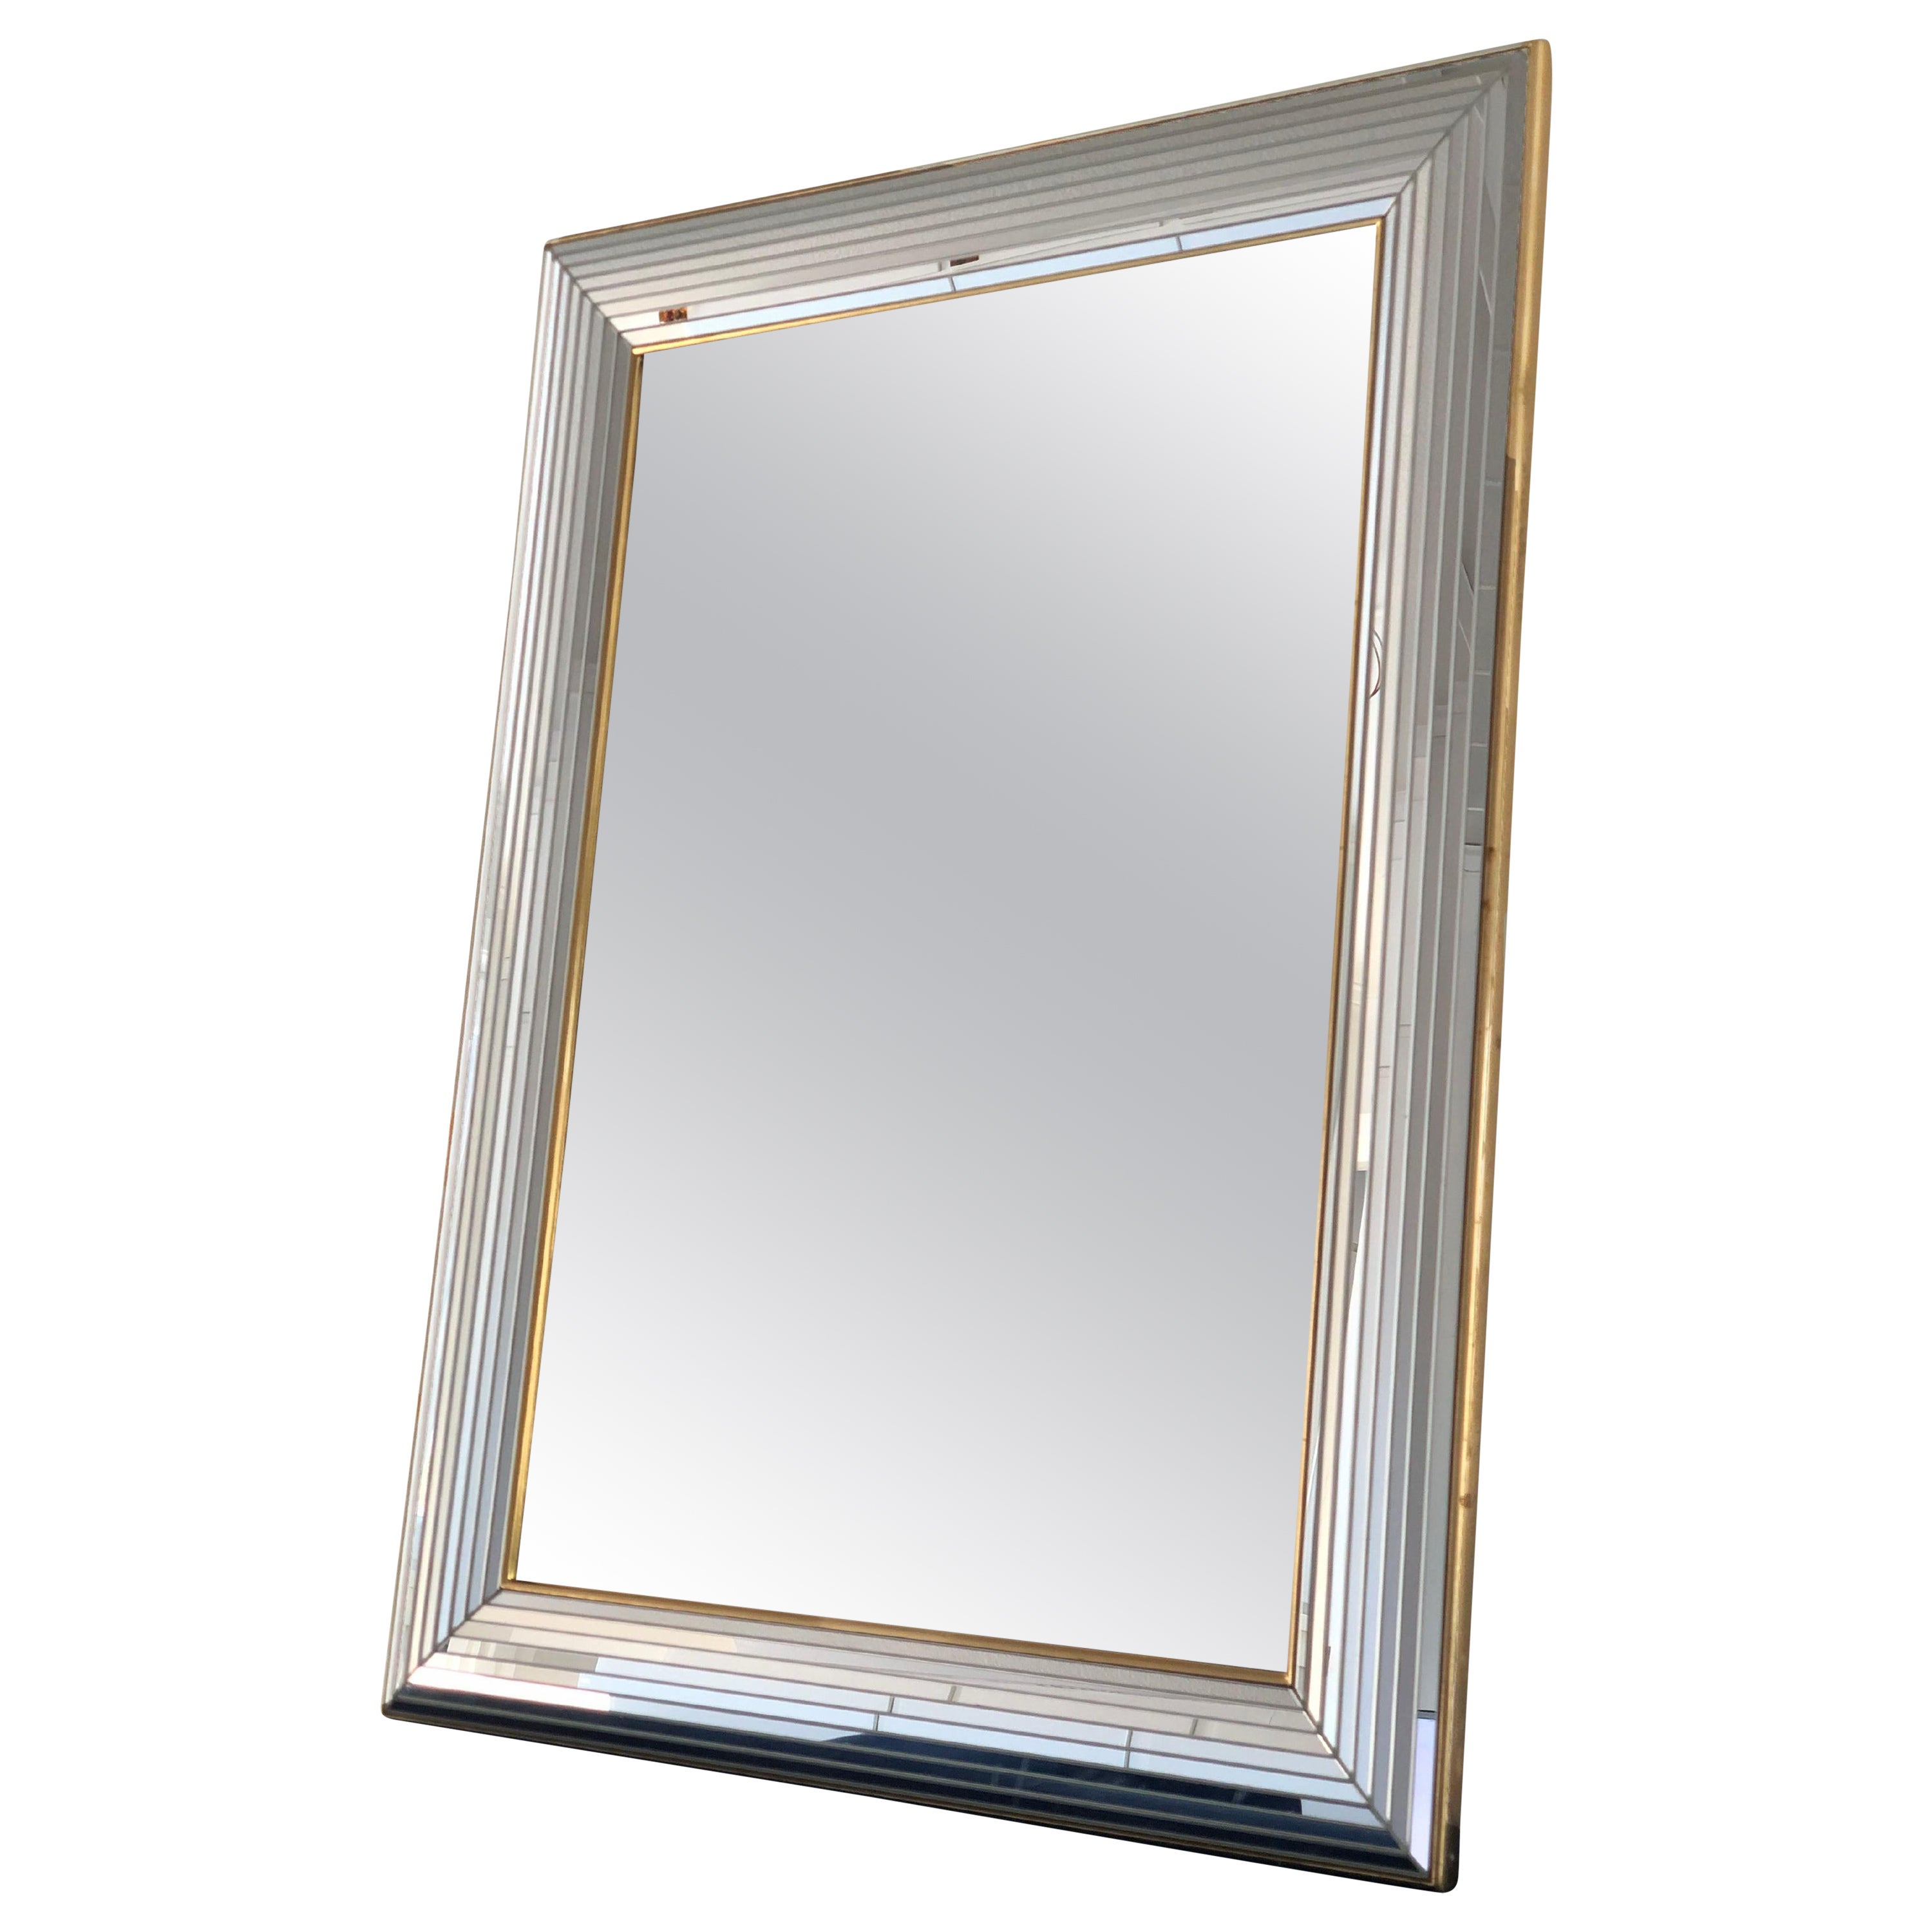 Beautiful Belgium mirror with a glass frame with a golden strip. The frame is made with small facet cut mirrors in the full width.

Handmade mirror In good condition. Belgium, 1980

Object: Mirror
Designer: Deknudt
Mark: A sticker on the back with